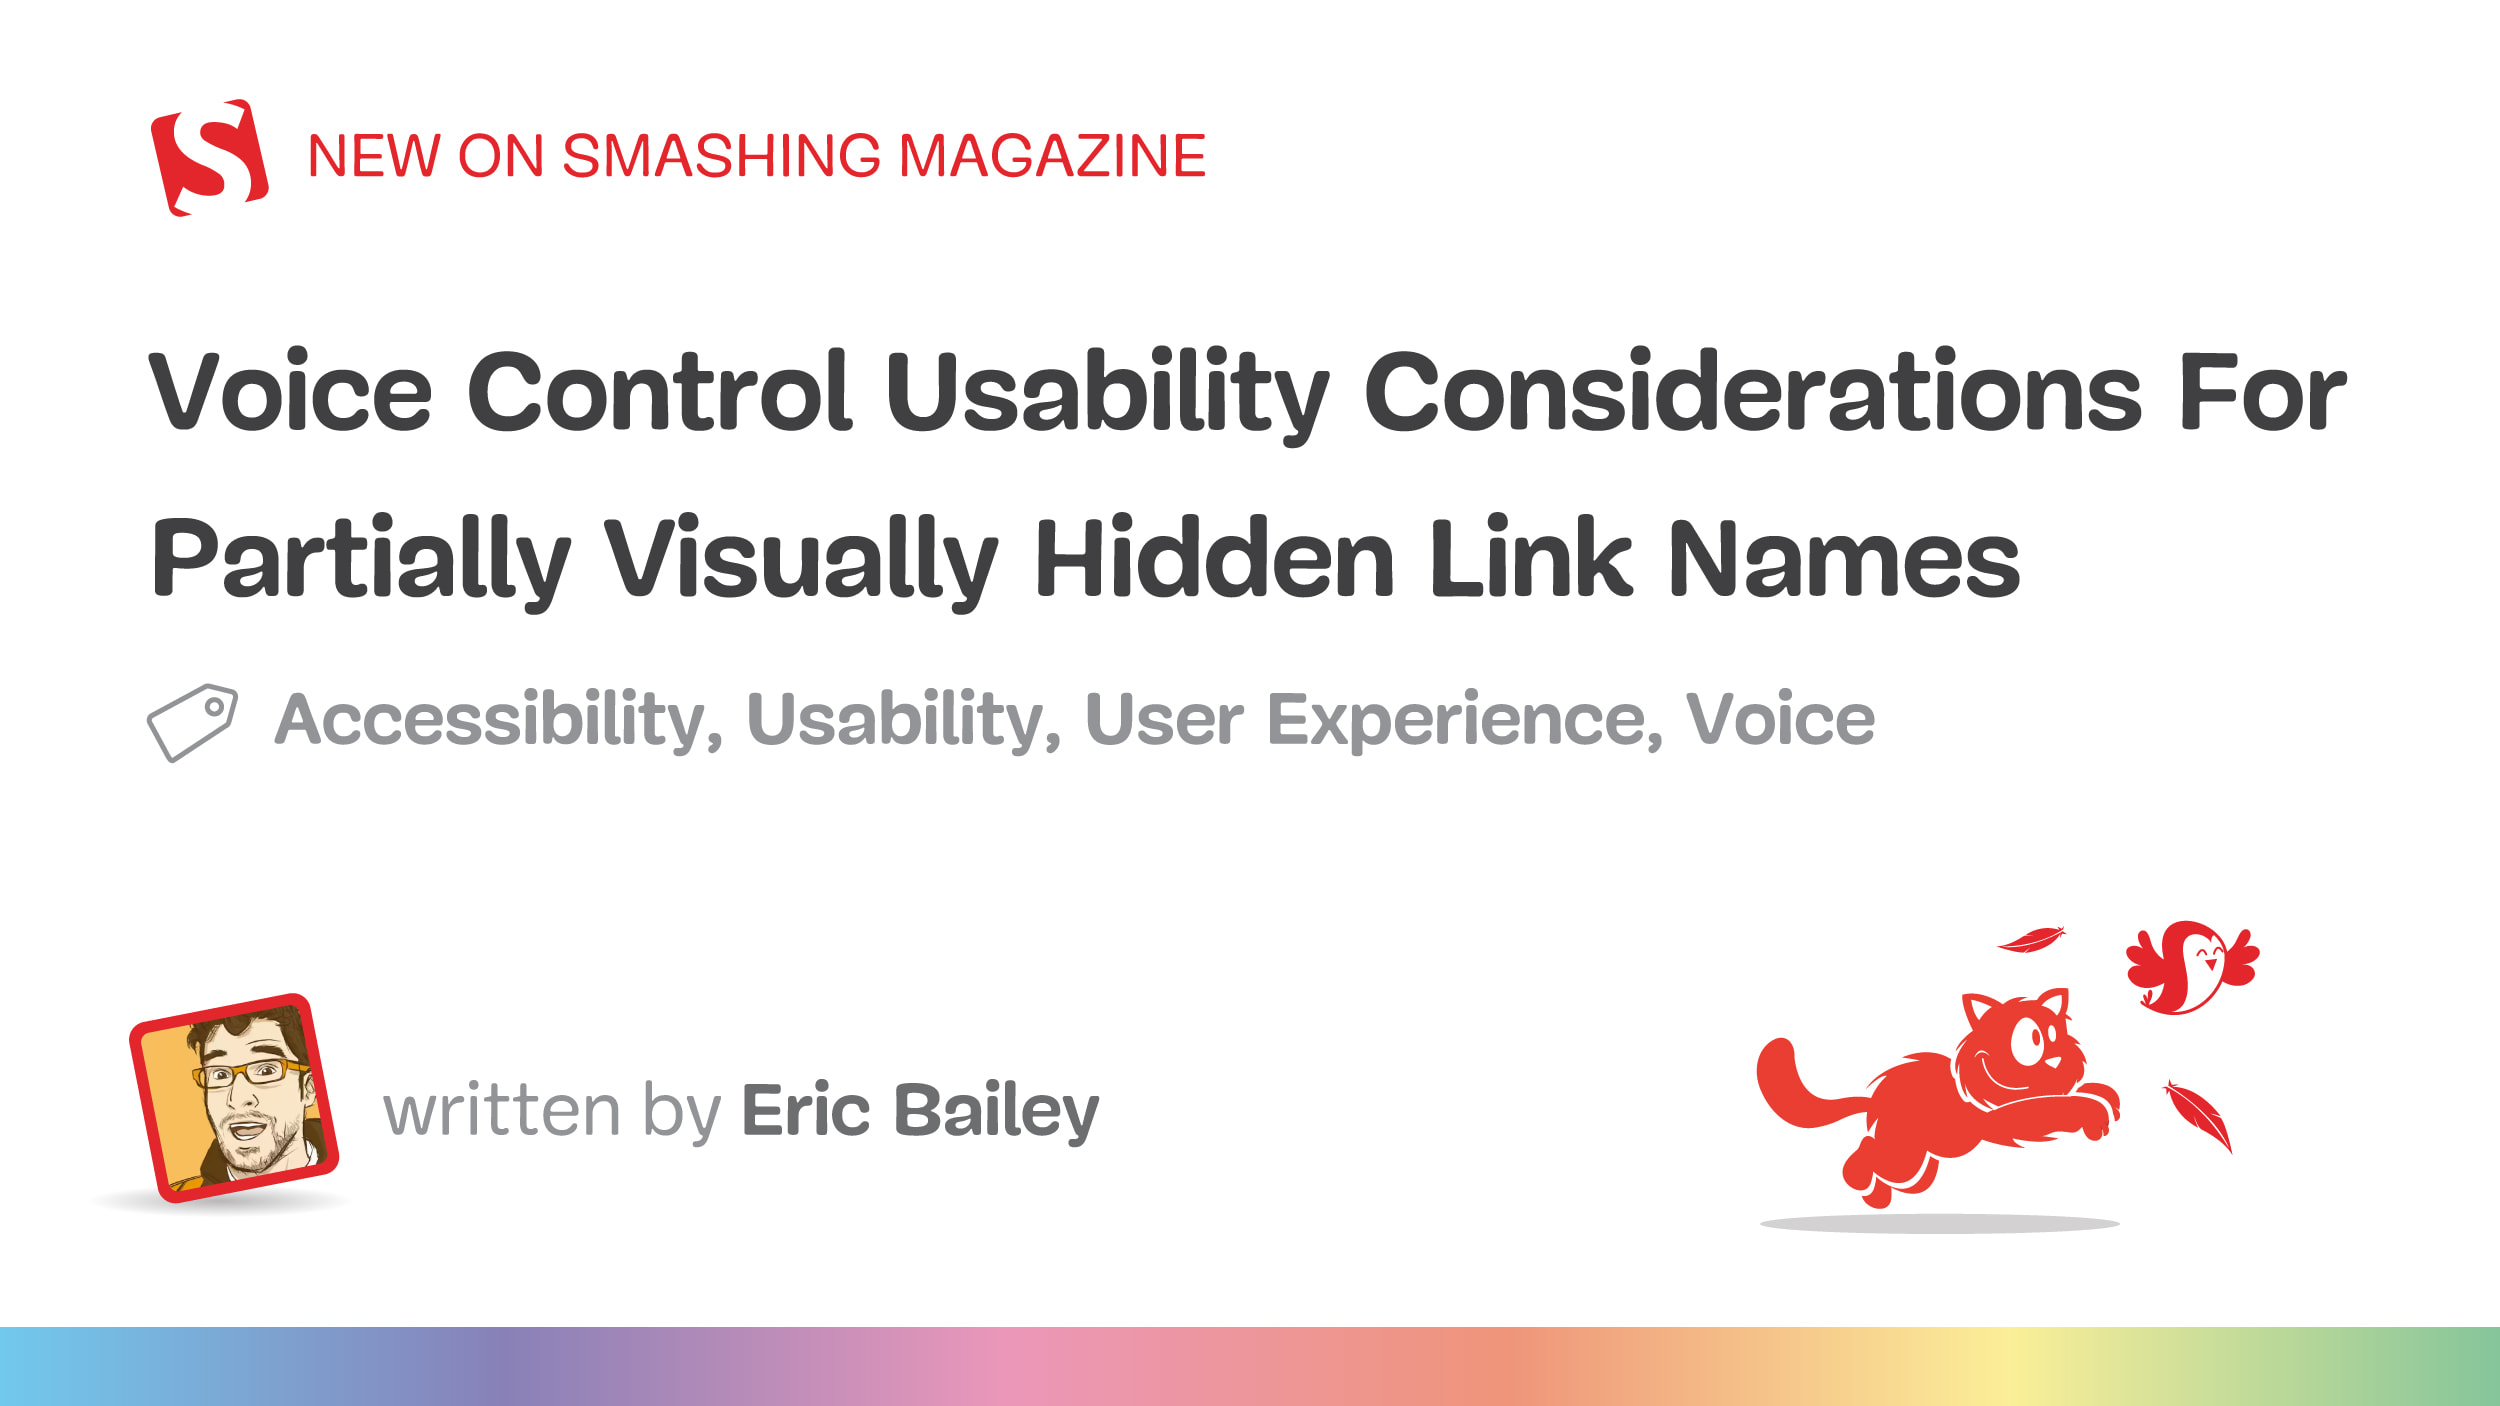 Voice Control Usability Considerations For Partially Visually Hidden Link Names